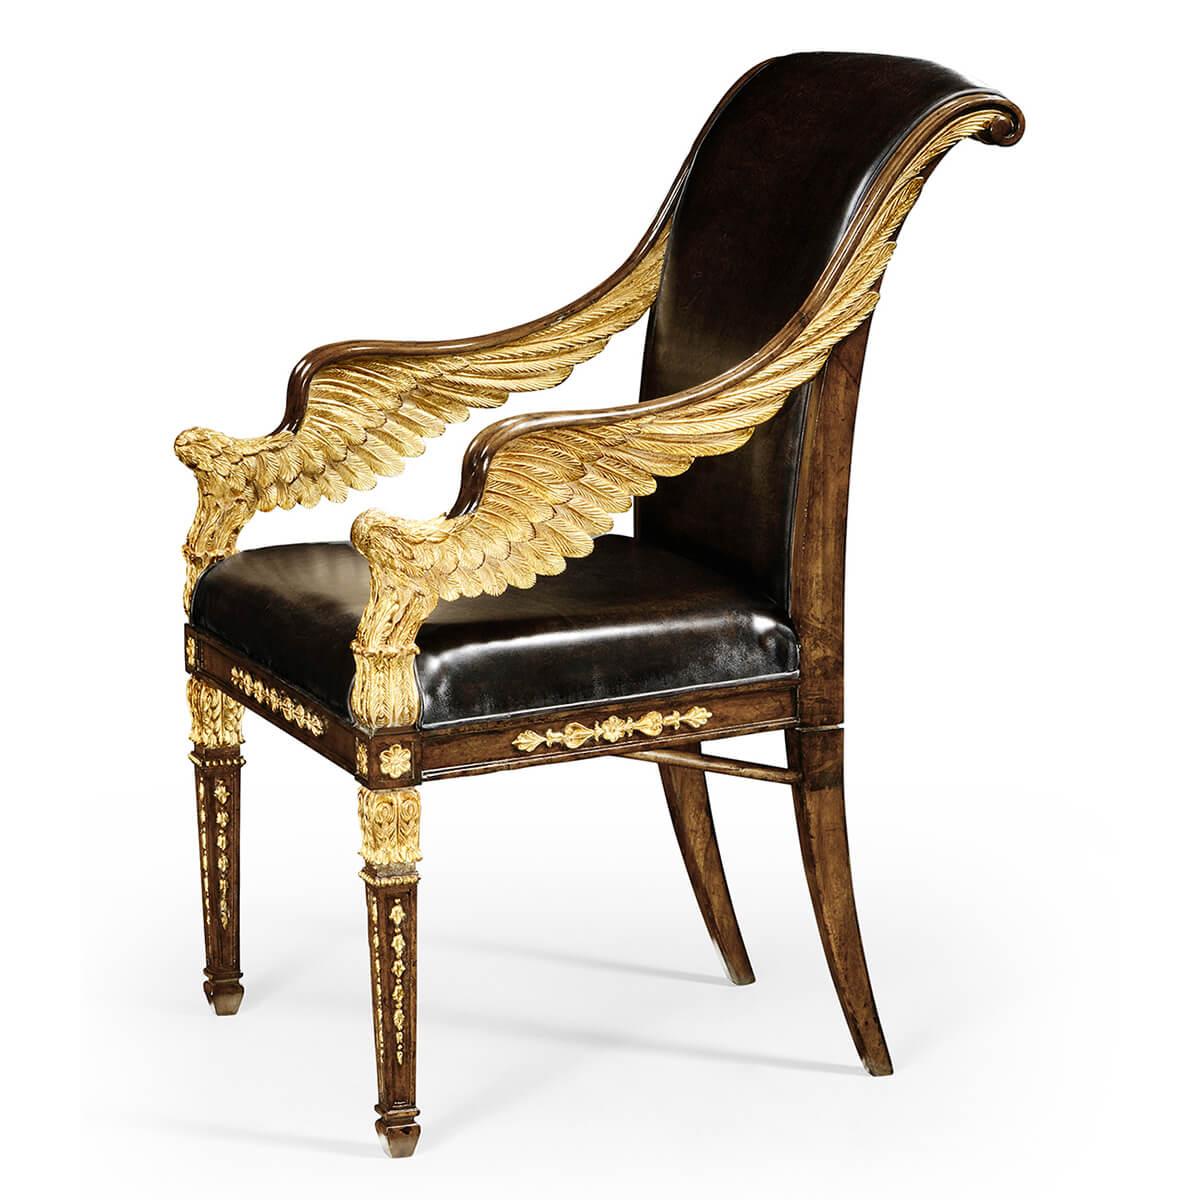 Impressive walnut and gilt Empire style armchair with finely carved golden wings to the arms and further carved gilt detail to the legs and seat rails. An antique caviar black leather upholstered back and seat. After French designs of the early 19th